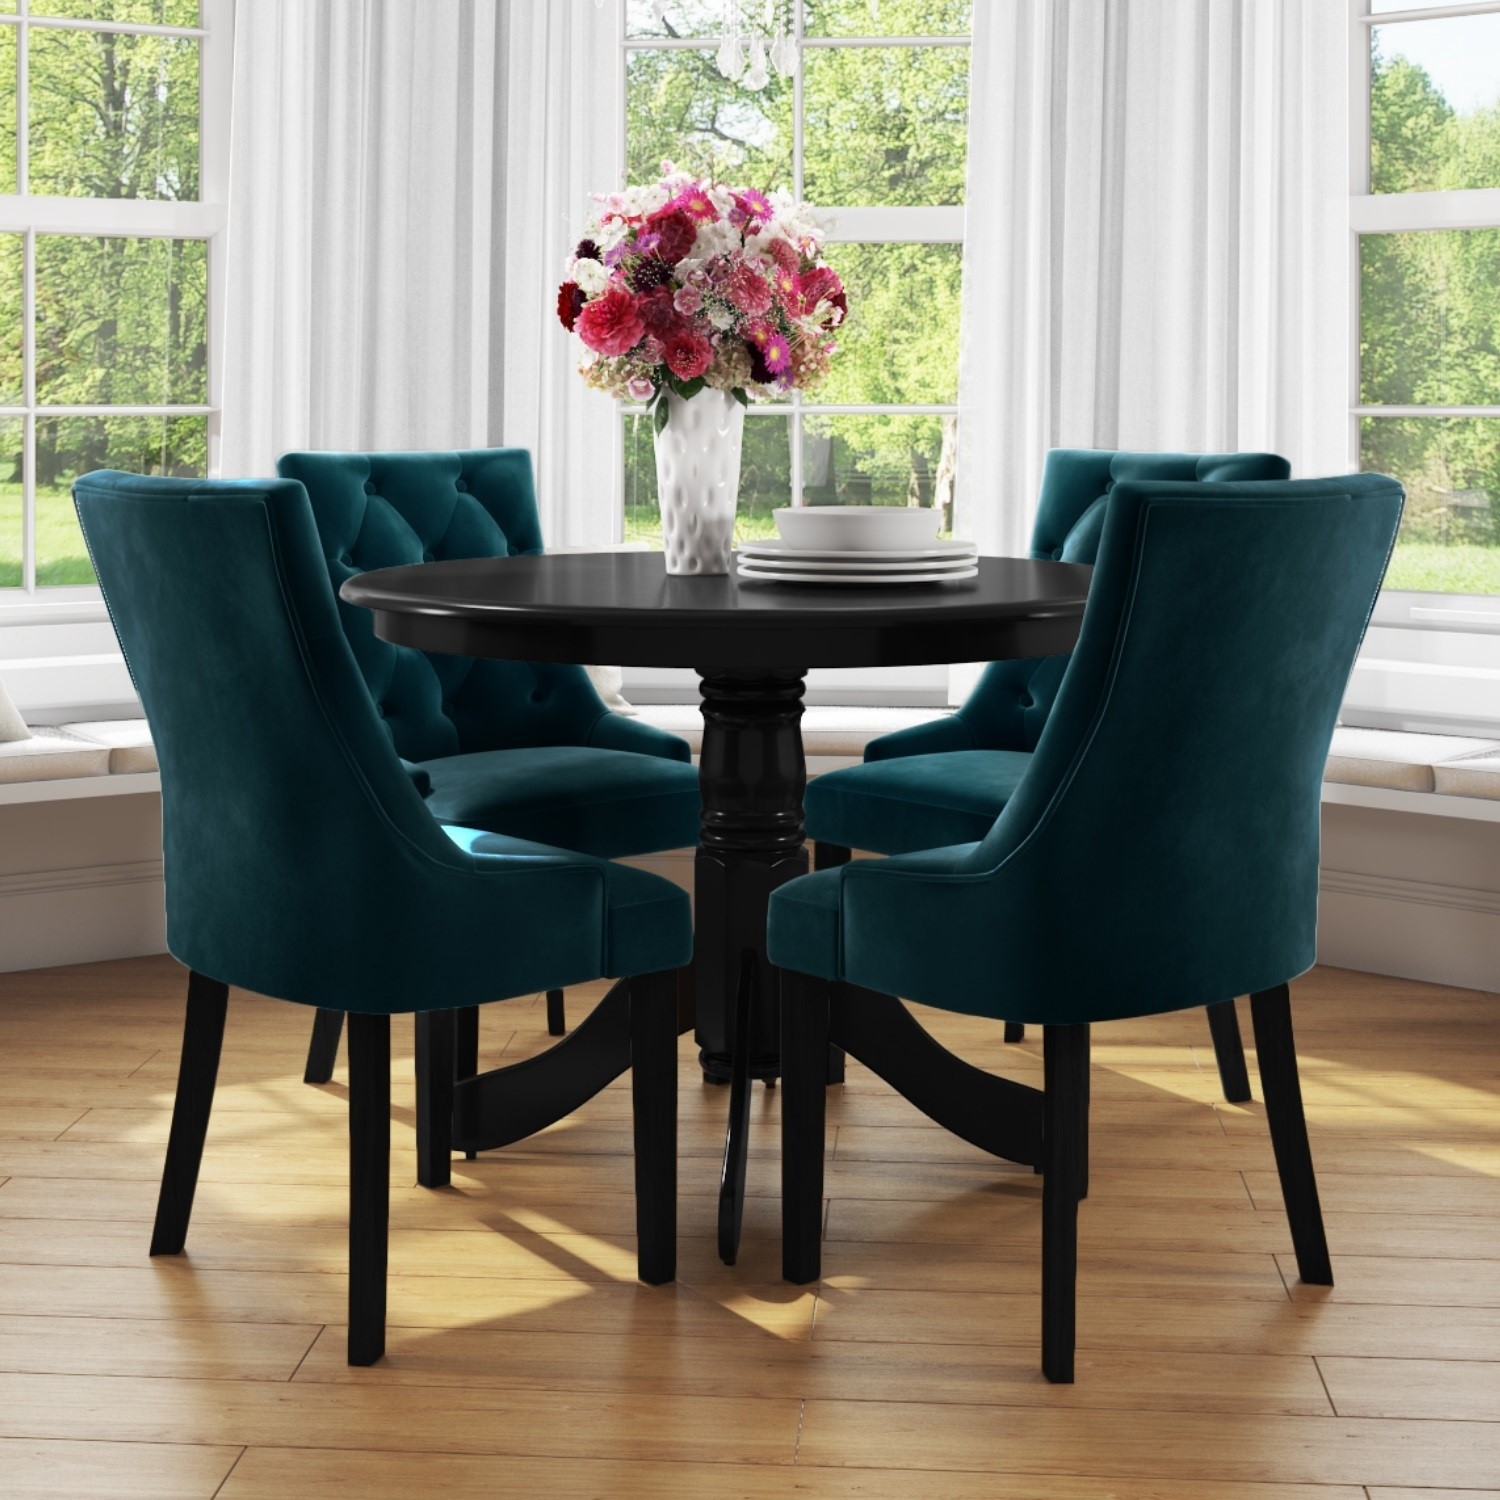 Small Round Dining Table In Black With, Small Round Black Table And Chairs